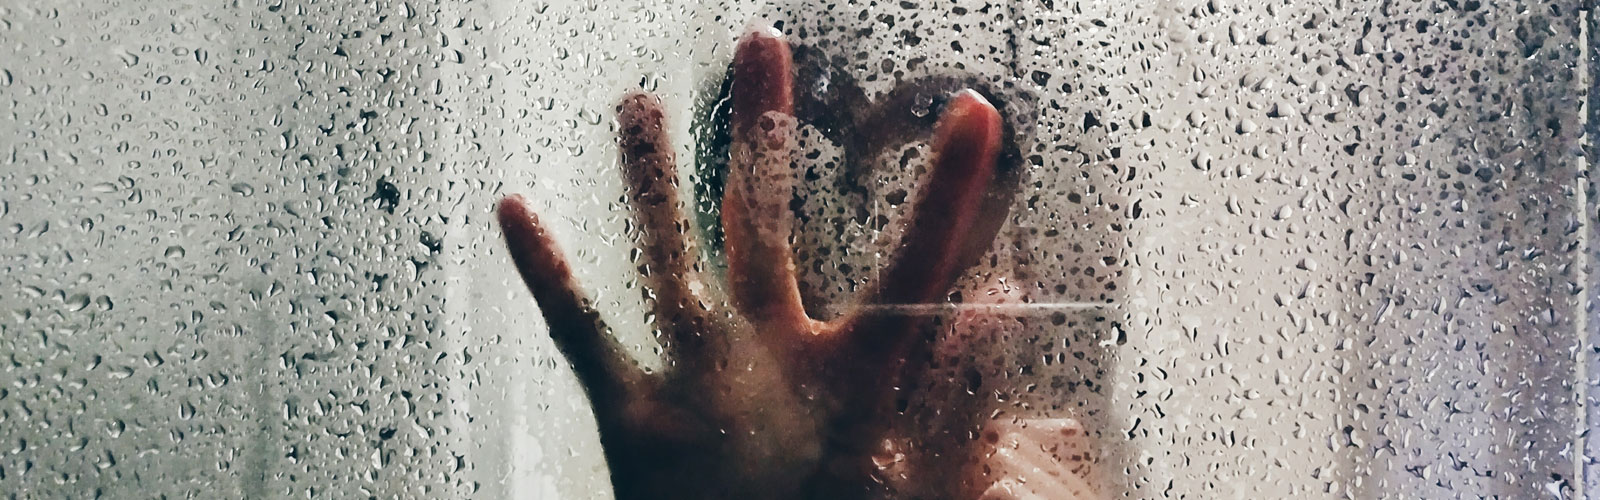 Couple's hands on shower screen